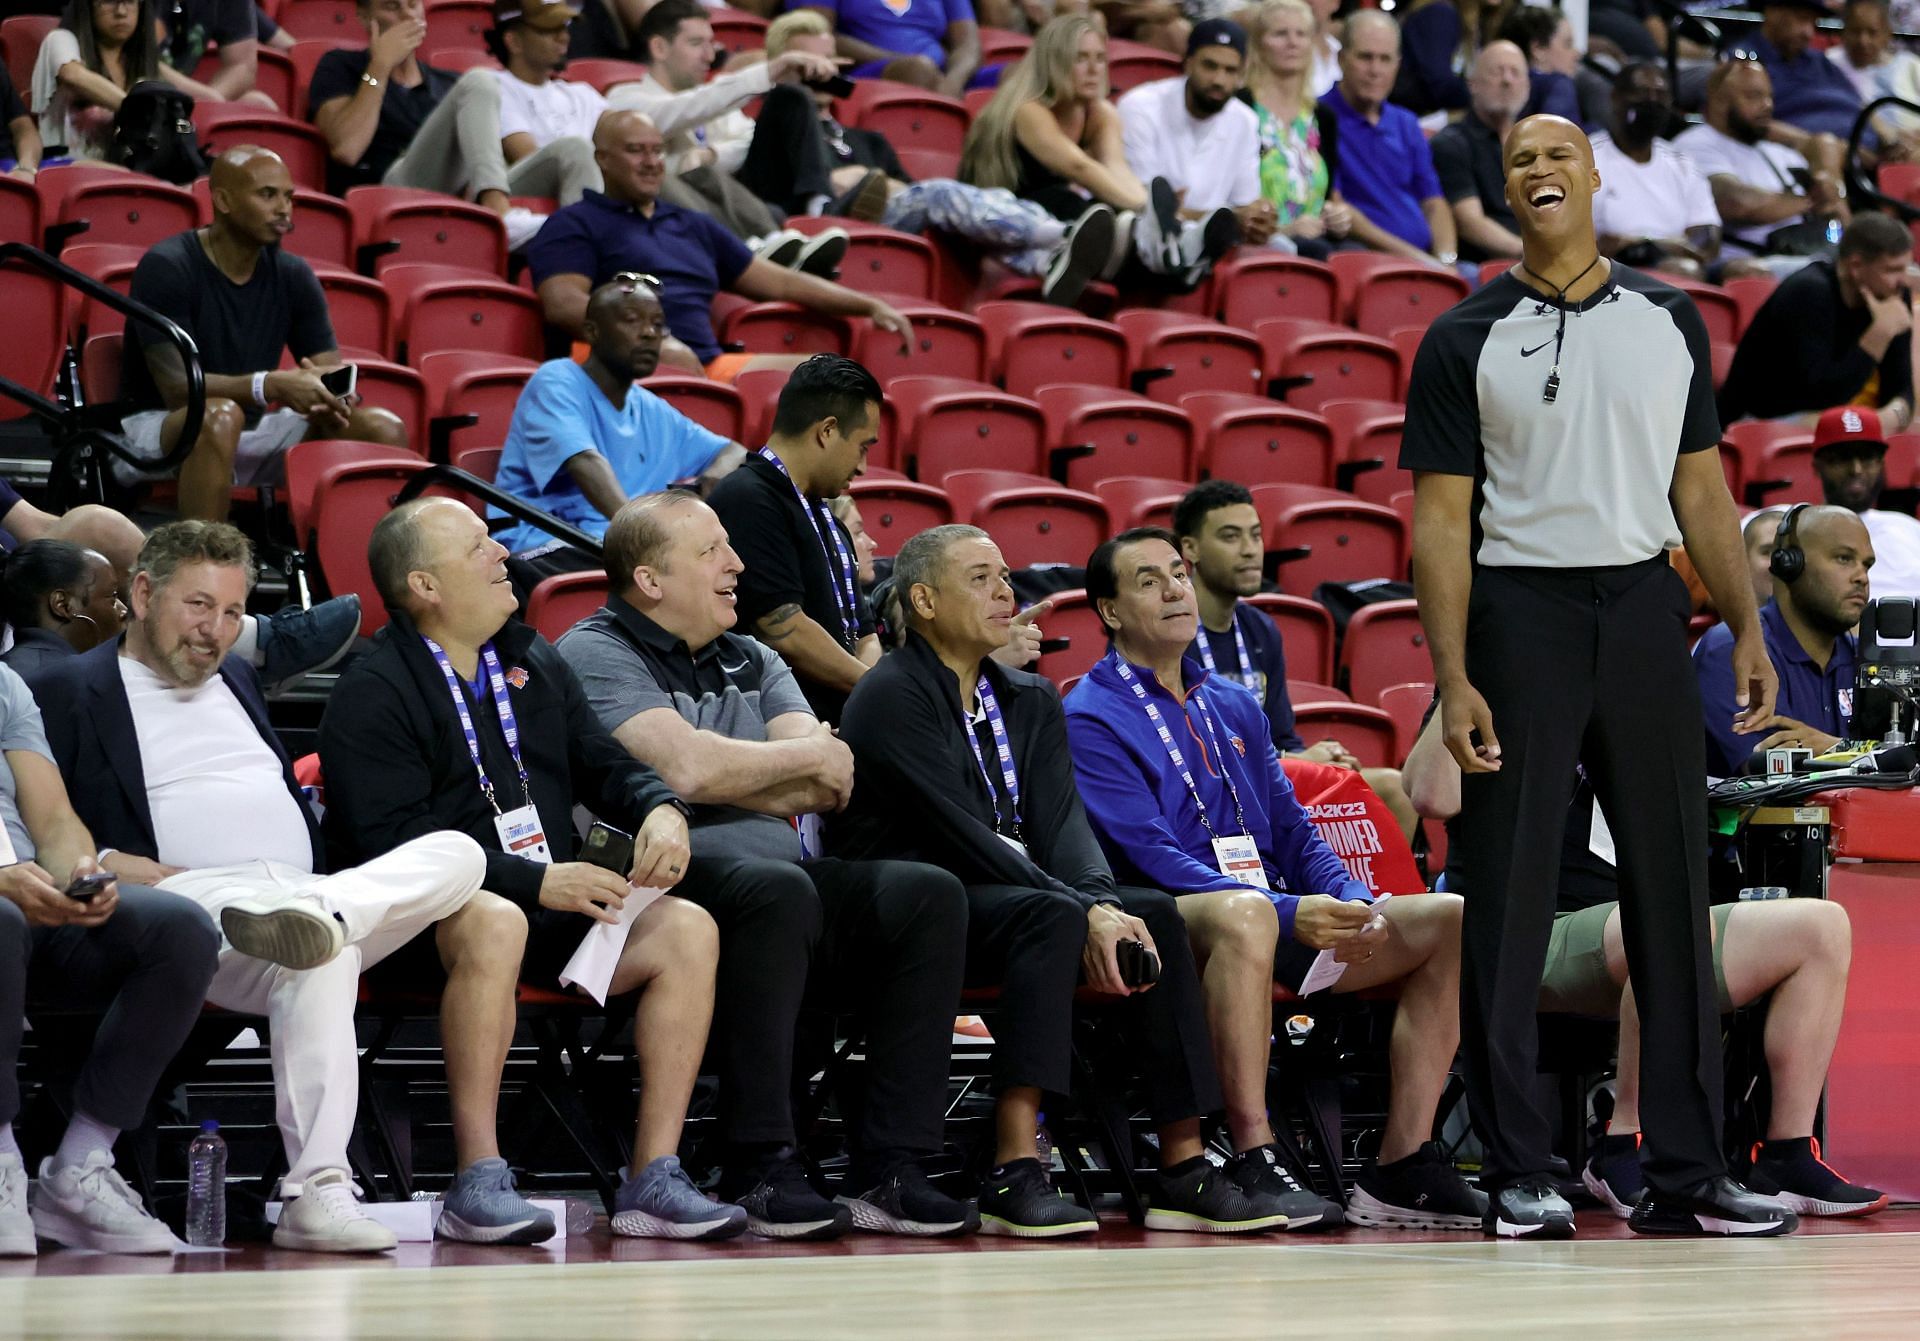 ESPN sports analyst and former NBA player Richard Jefferson (R) laughs as people in the front row, including owner James Dolan (L) and head coach Tom Thibodeau (3rd L) of the New York Knicks, talk to him as he officiates the second quarter of a game between the Knicks and the Portland Trail Blazers during the 2022 NBA Summer League at the Thomas &amp; Mack Center on July 11, 2022 in Las Vegas, Nevada.